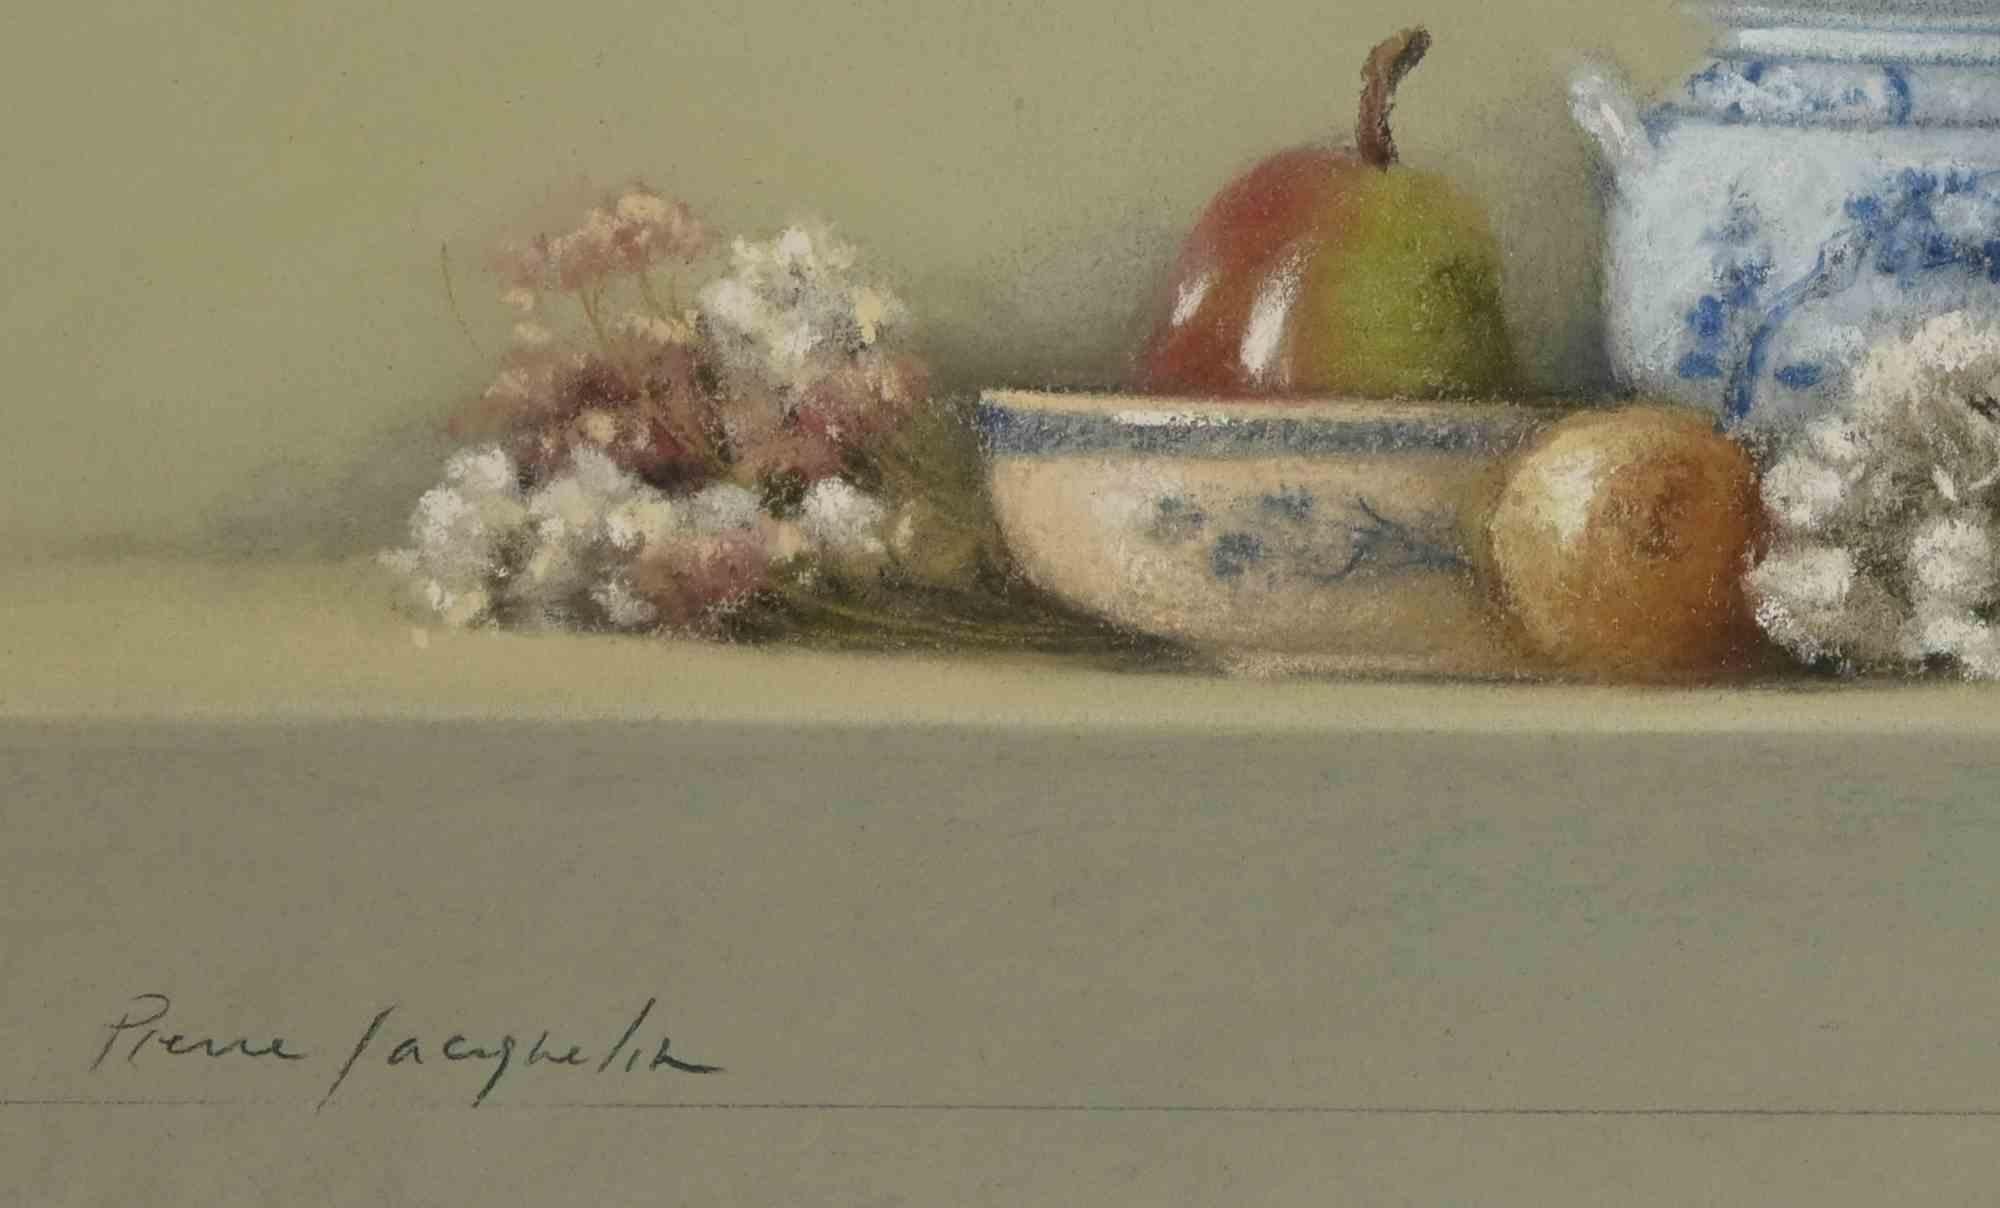 Still Life with Pots - Watercolor by Pierre Jacquelin - 1980s - Art by Pierre Jacqueline